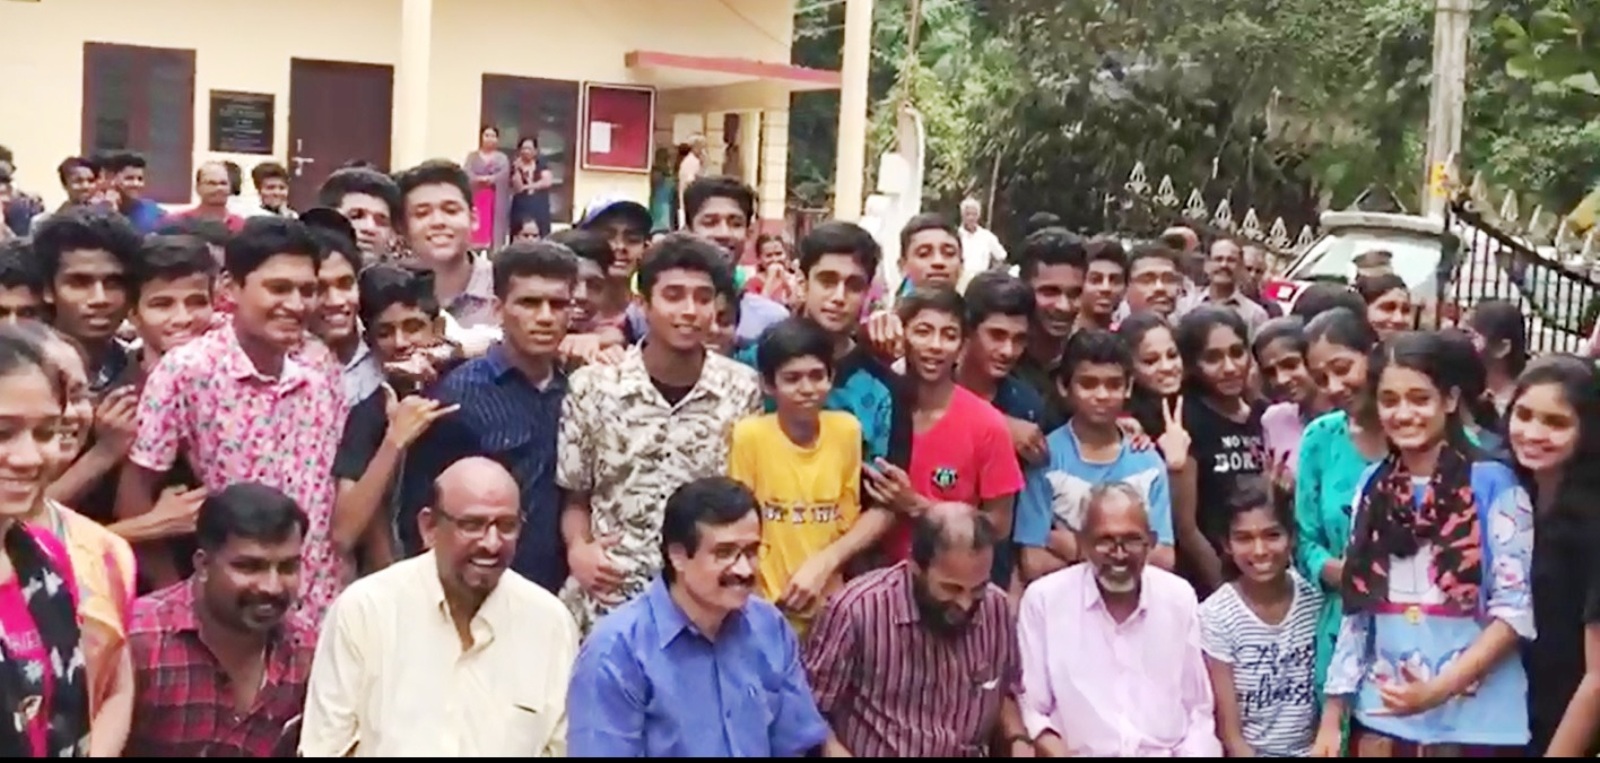 Students with Education Minister of Kerala 2019